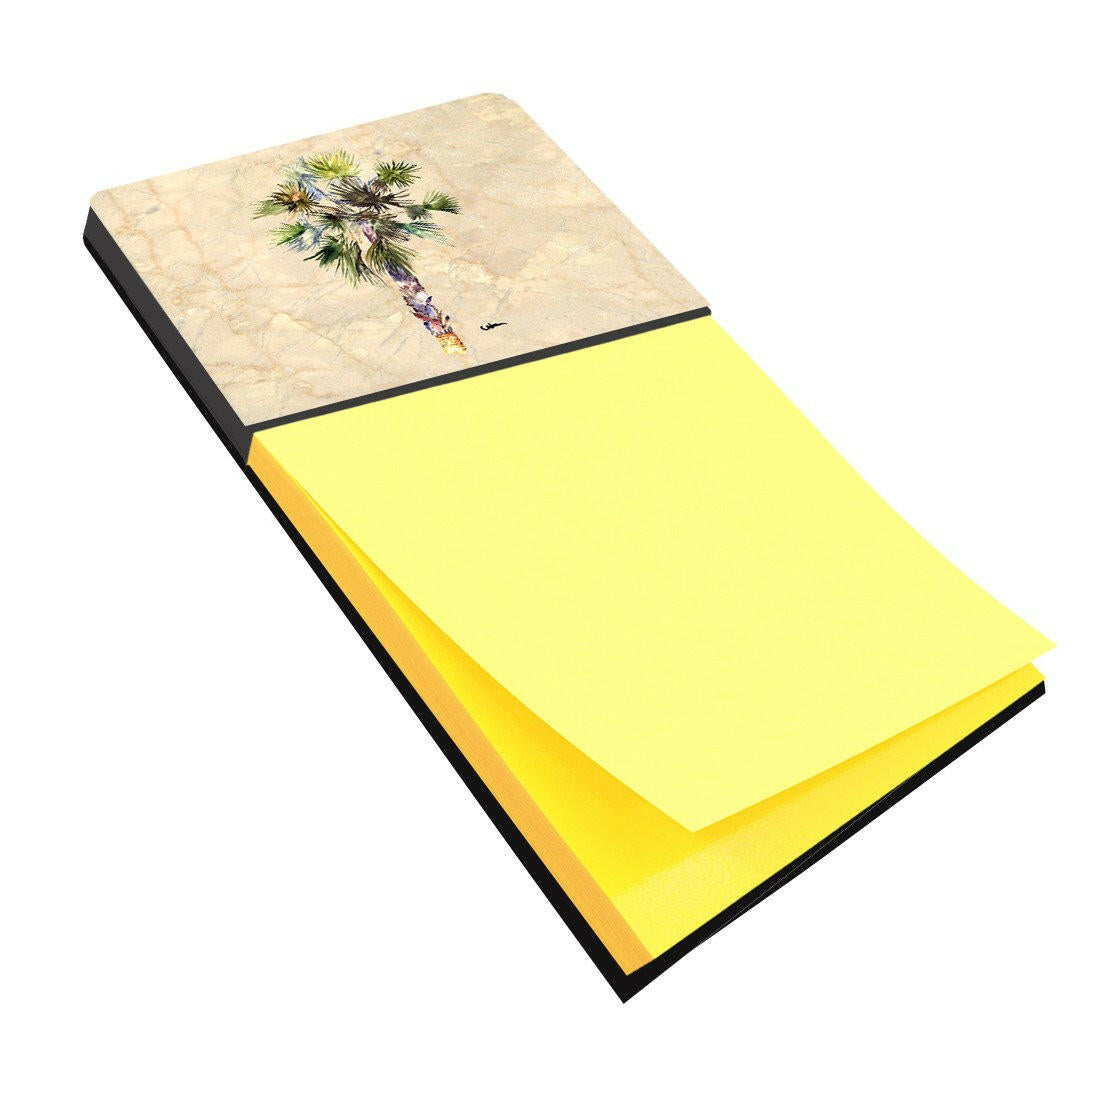 Palm Tree Refiillable Sticky Note Holder or Postit Note Dispenser 8481SN by Caroline's Treasures